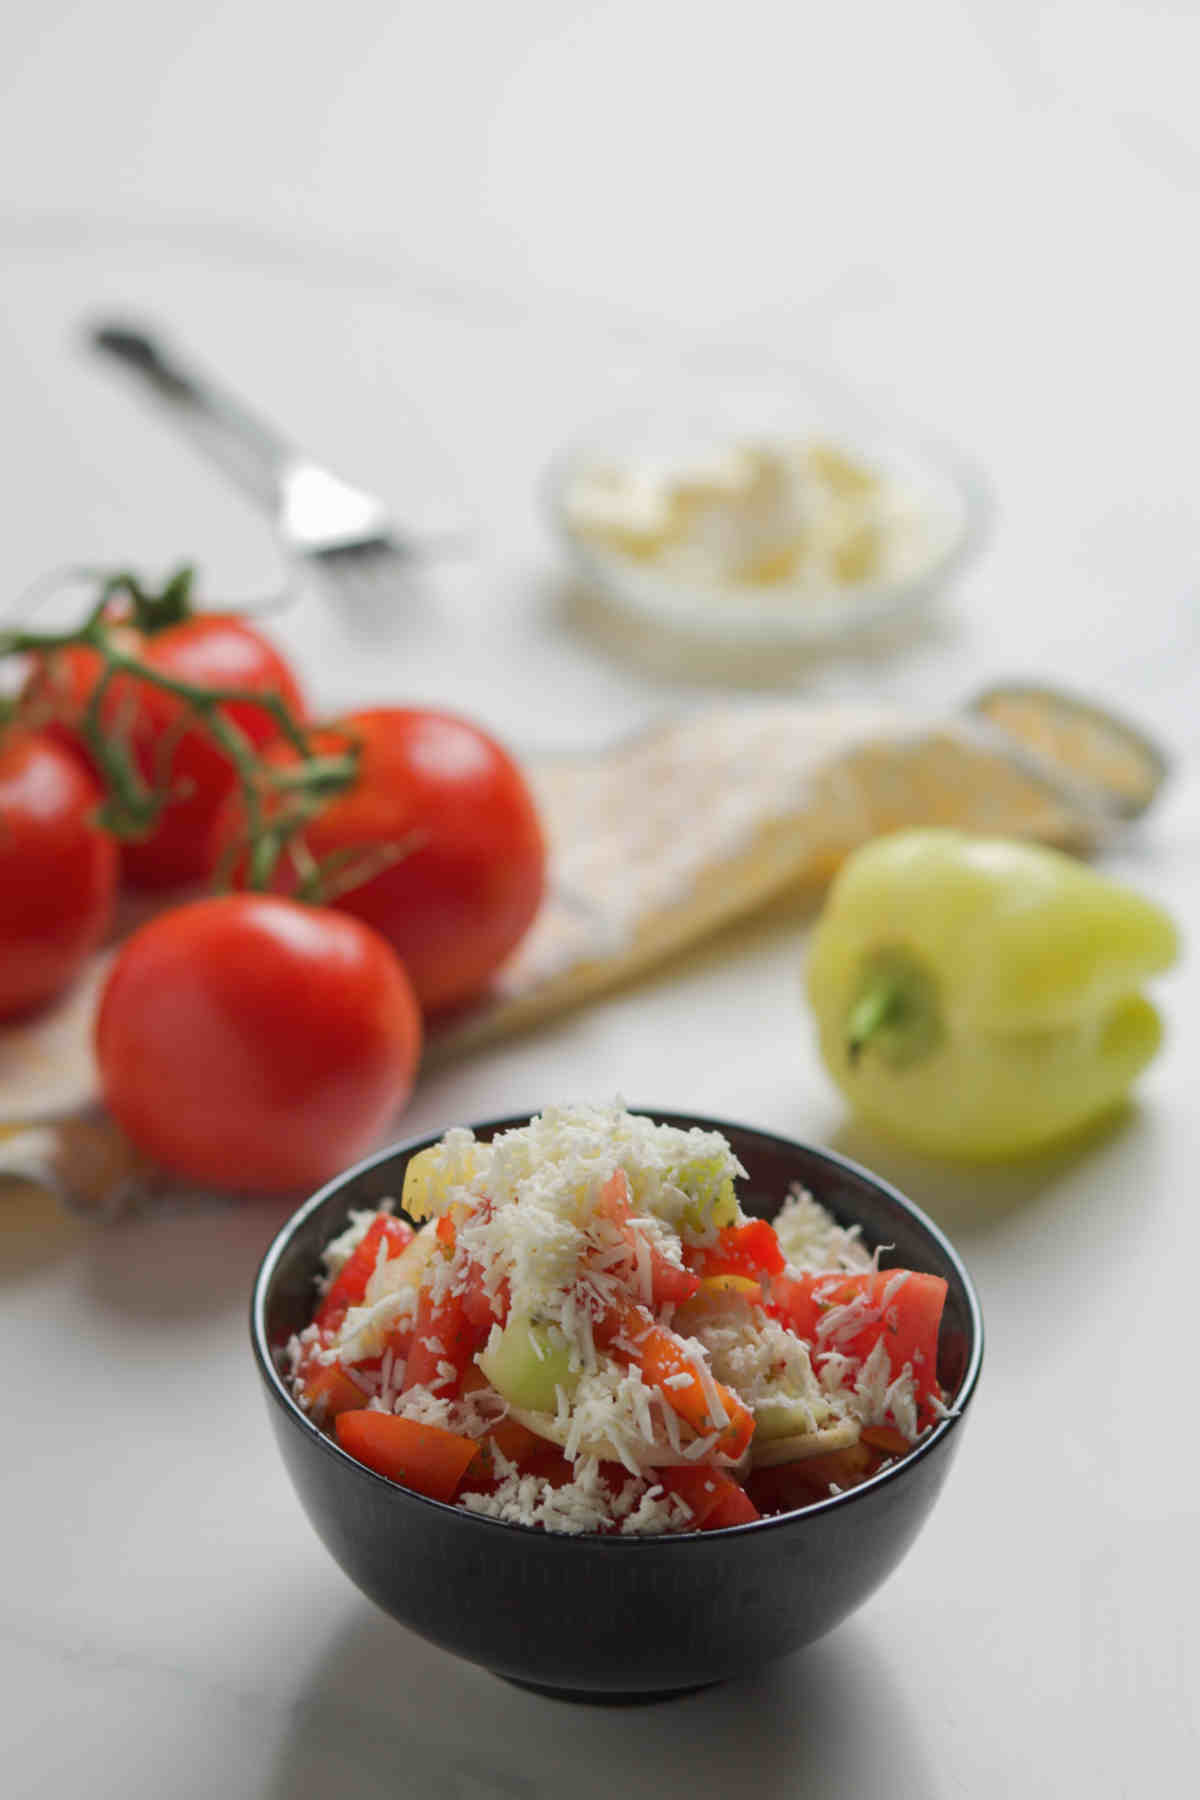 Bowl of salad, tomatoes on vine, fork, napkin, bell pepper and grated cheese  on white background. 